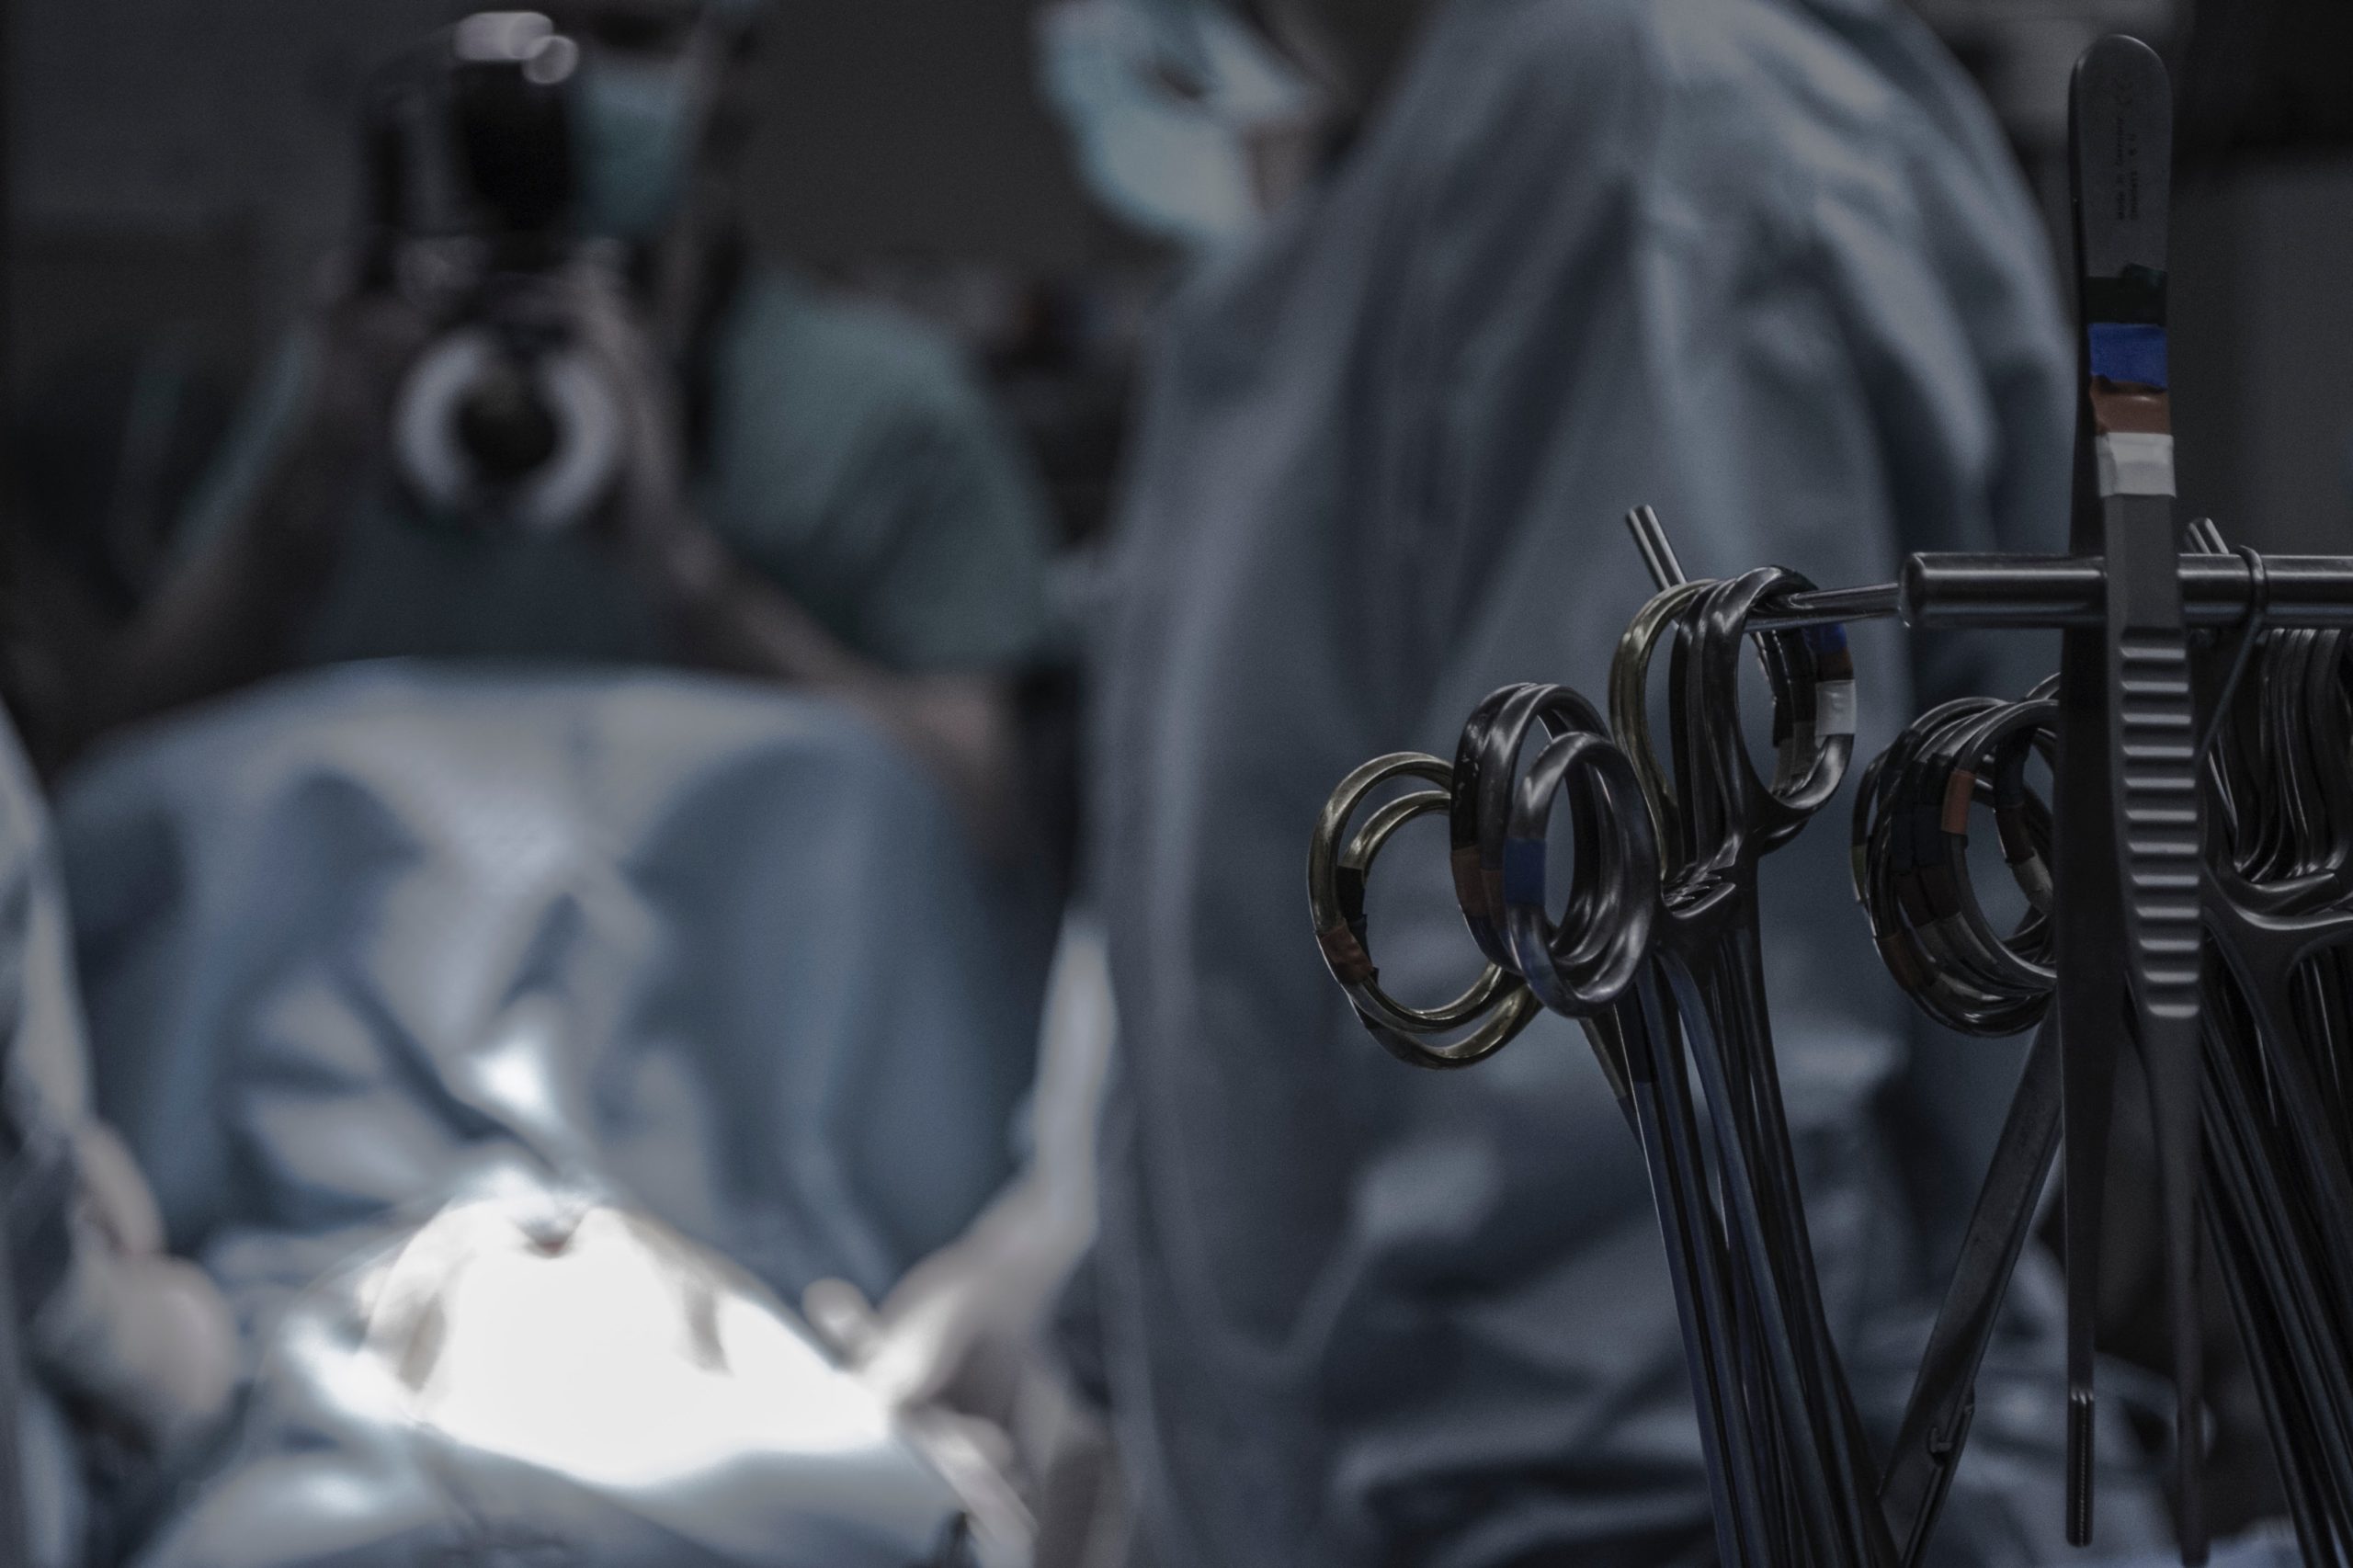 Over 1 Million Hernia Repair Surgeries are Performed in the US - Market Overview